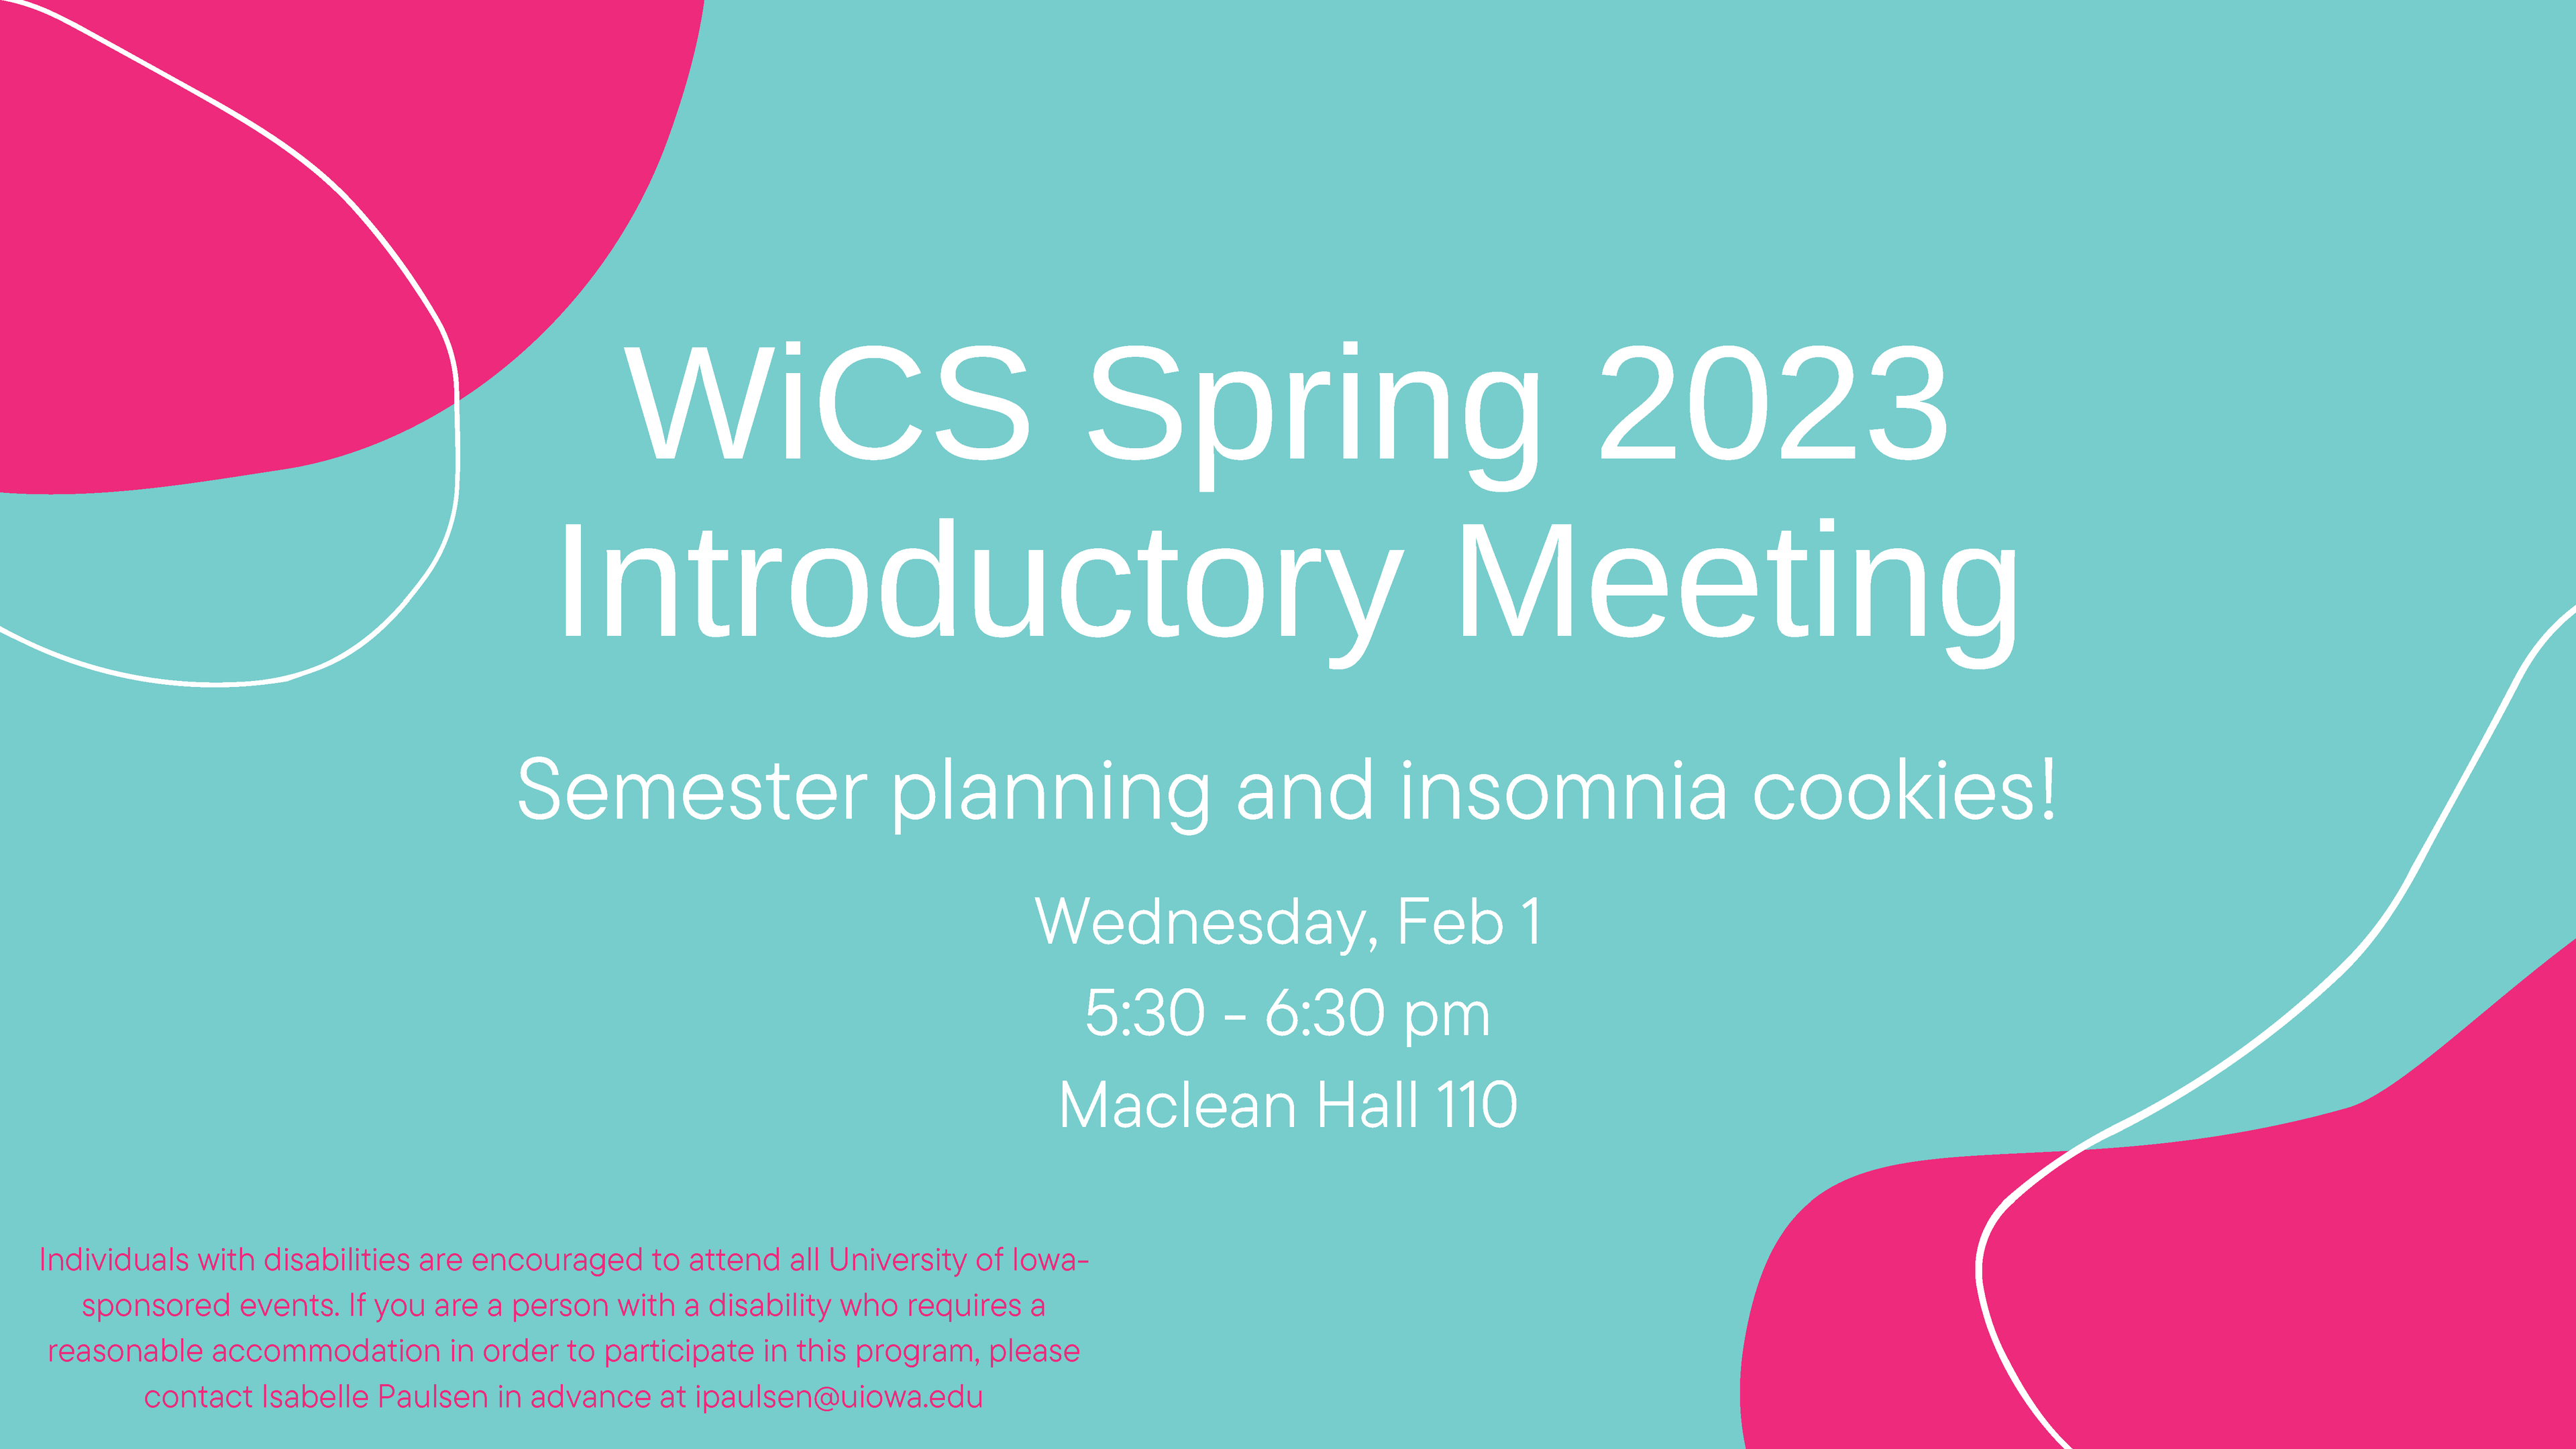 WiCS Spring 2023 Introductory Meeting Semester planning and insomnia cookies! Wednesday, Feb 1 5:30 - 6:30 pm Maclean Hall 110 Individuals with disabilities are encouraged to attend all University of Iowasponsored events. If you are a person with a disability who requires a reasonable accommodation in order to participate in this program, please contact Isabelle Paulsen in advance at ipaulsen@uiowa.edu